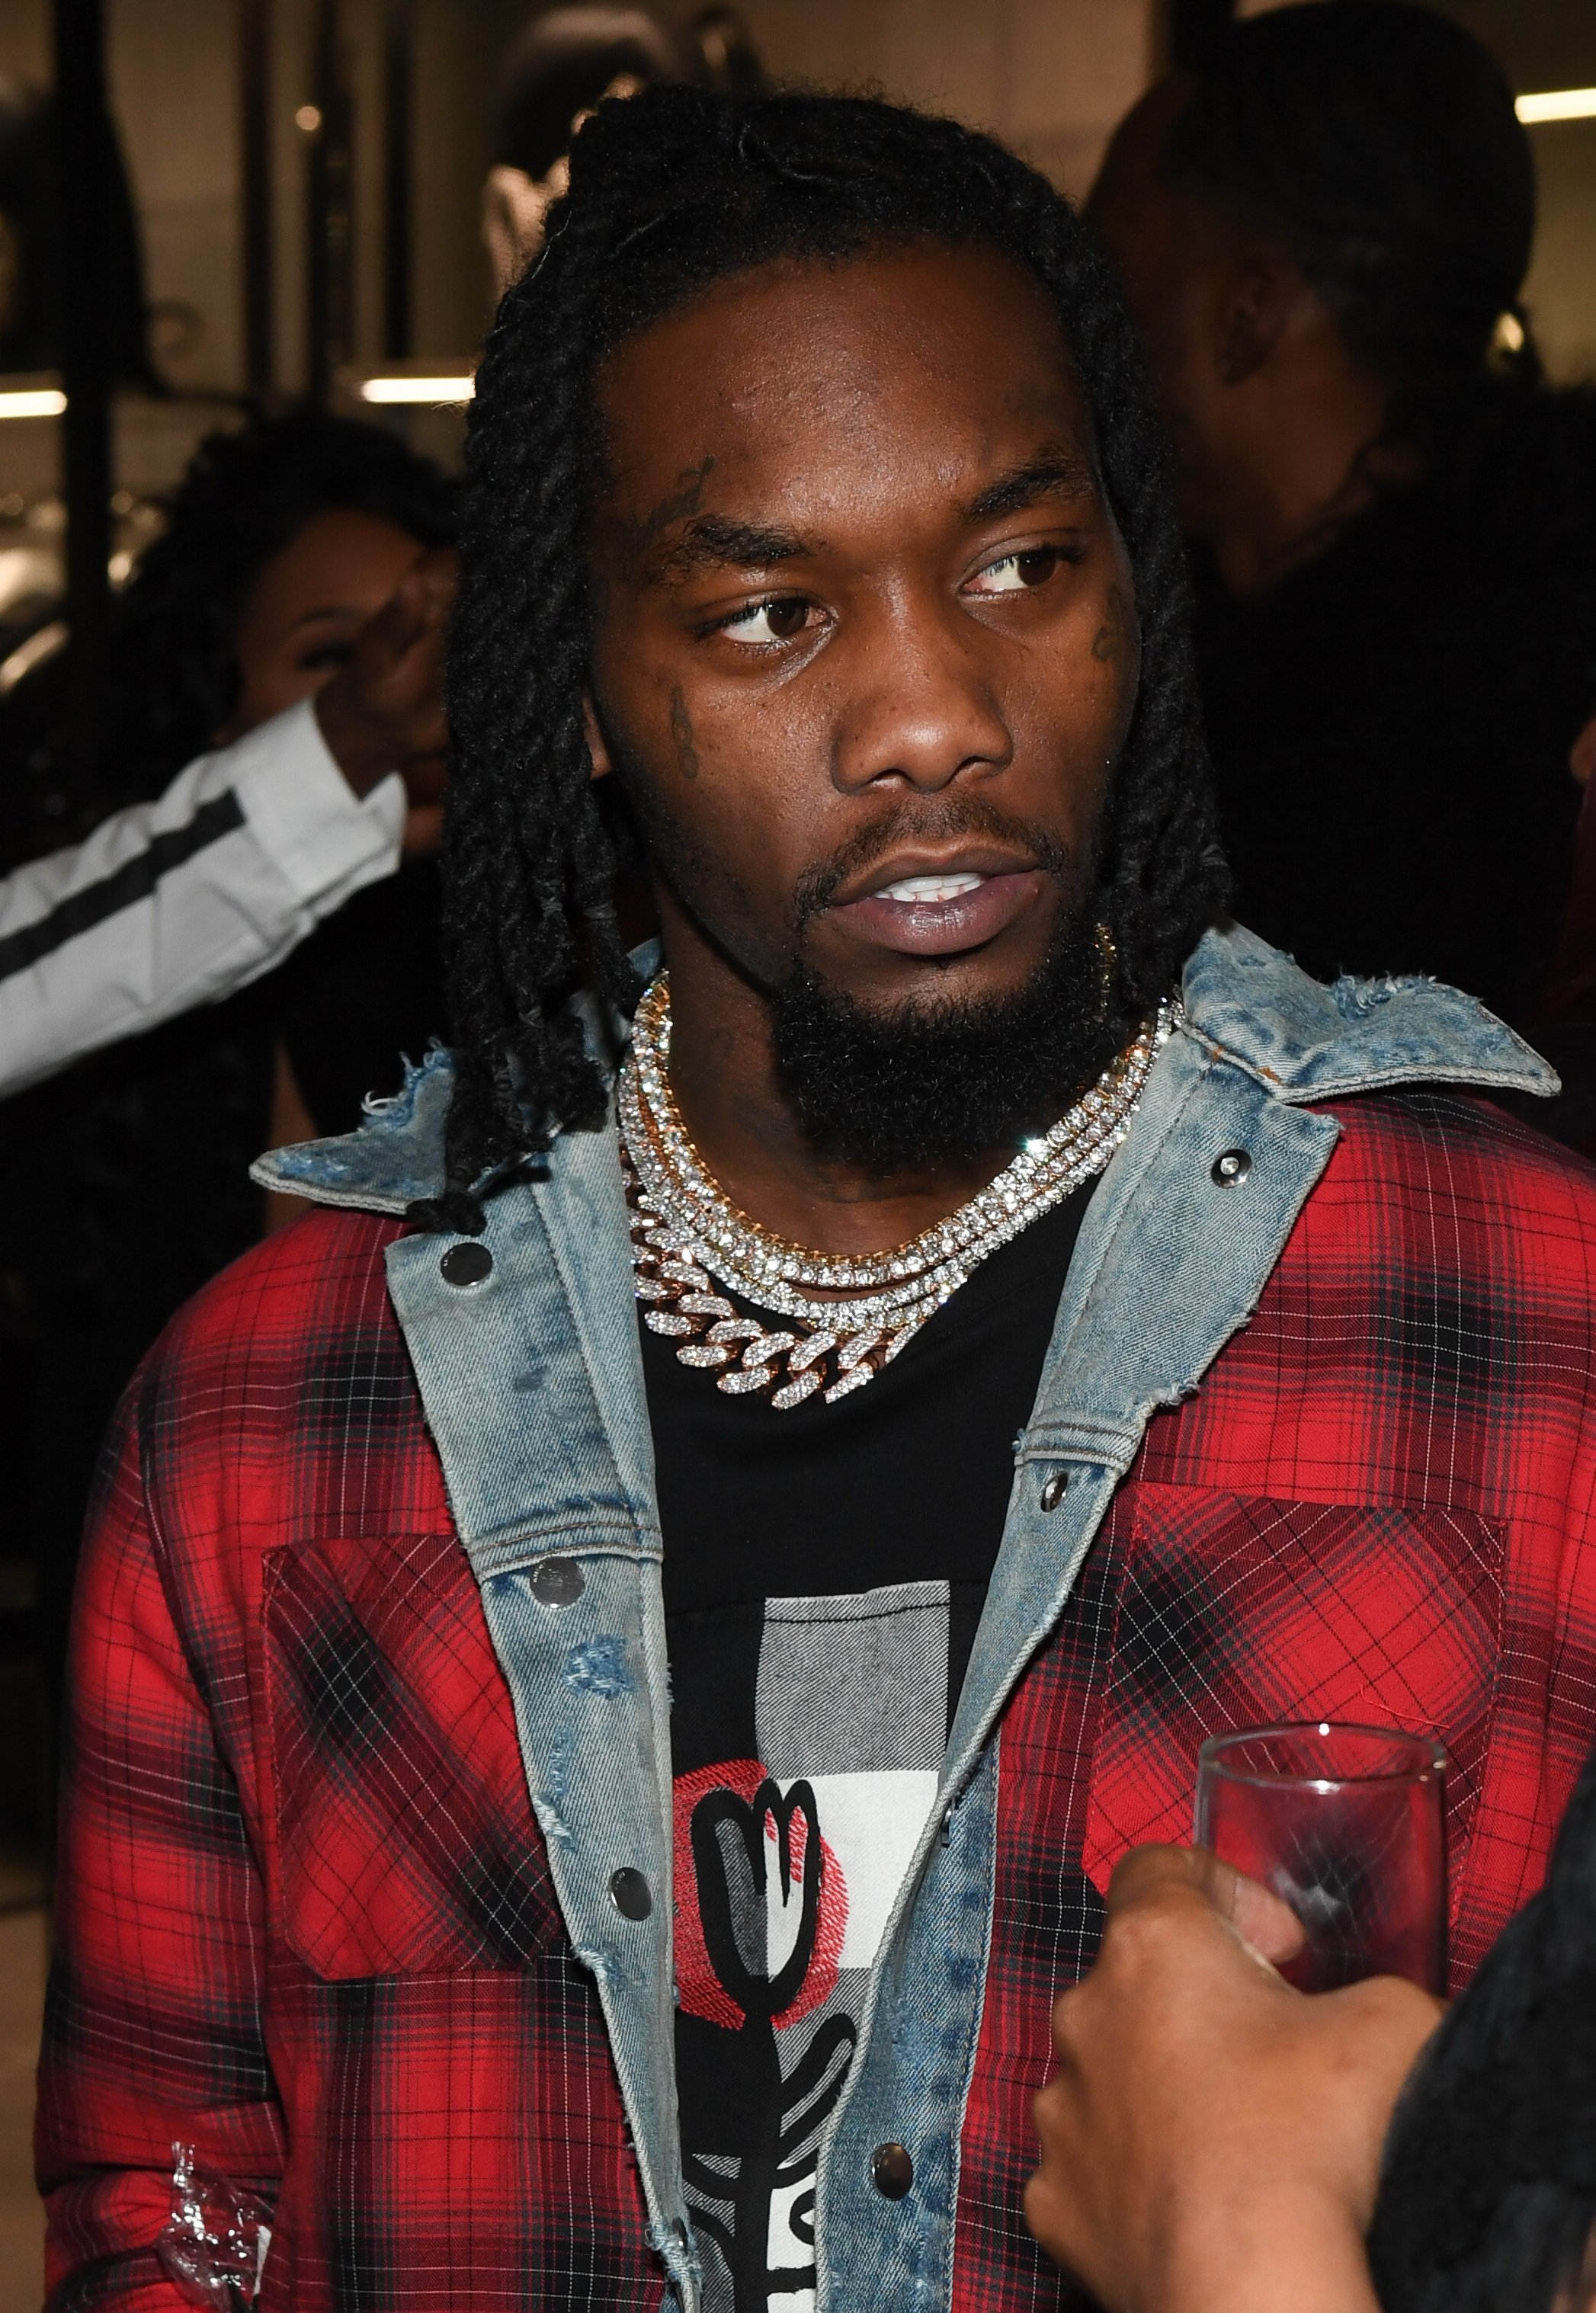  Offset of the Migos at Philipp Plein Masquerade/Halloween Fall Shopping Event. | Photo: GettyImages